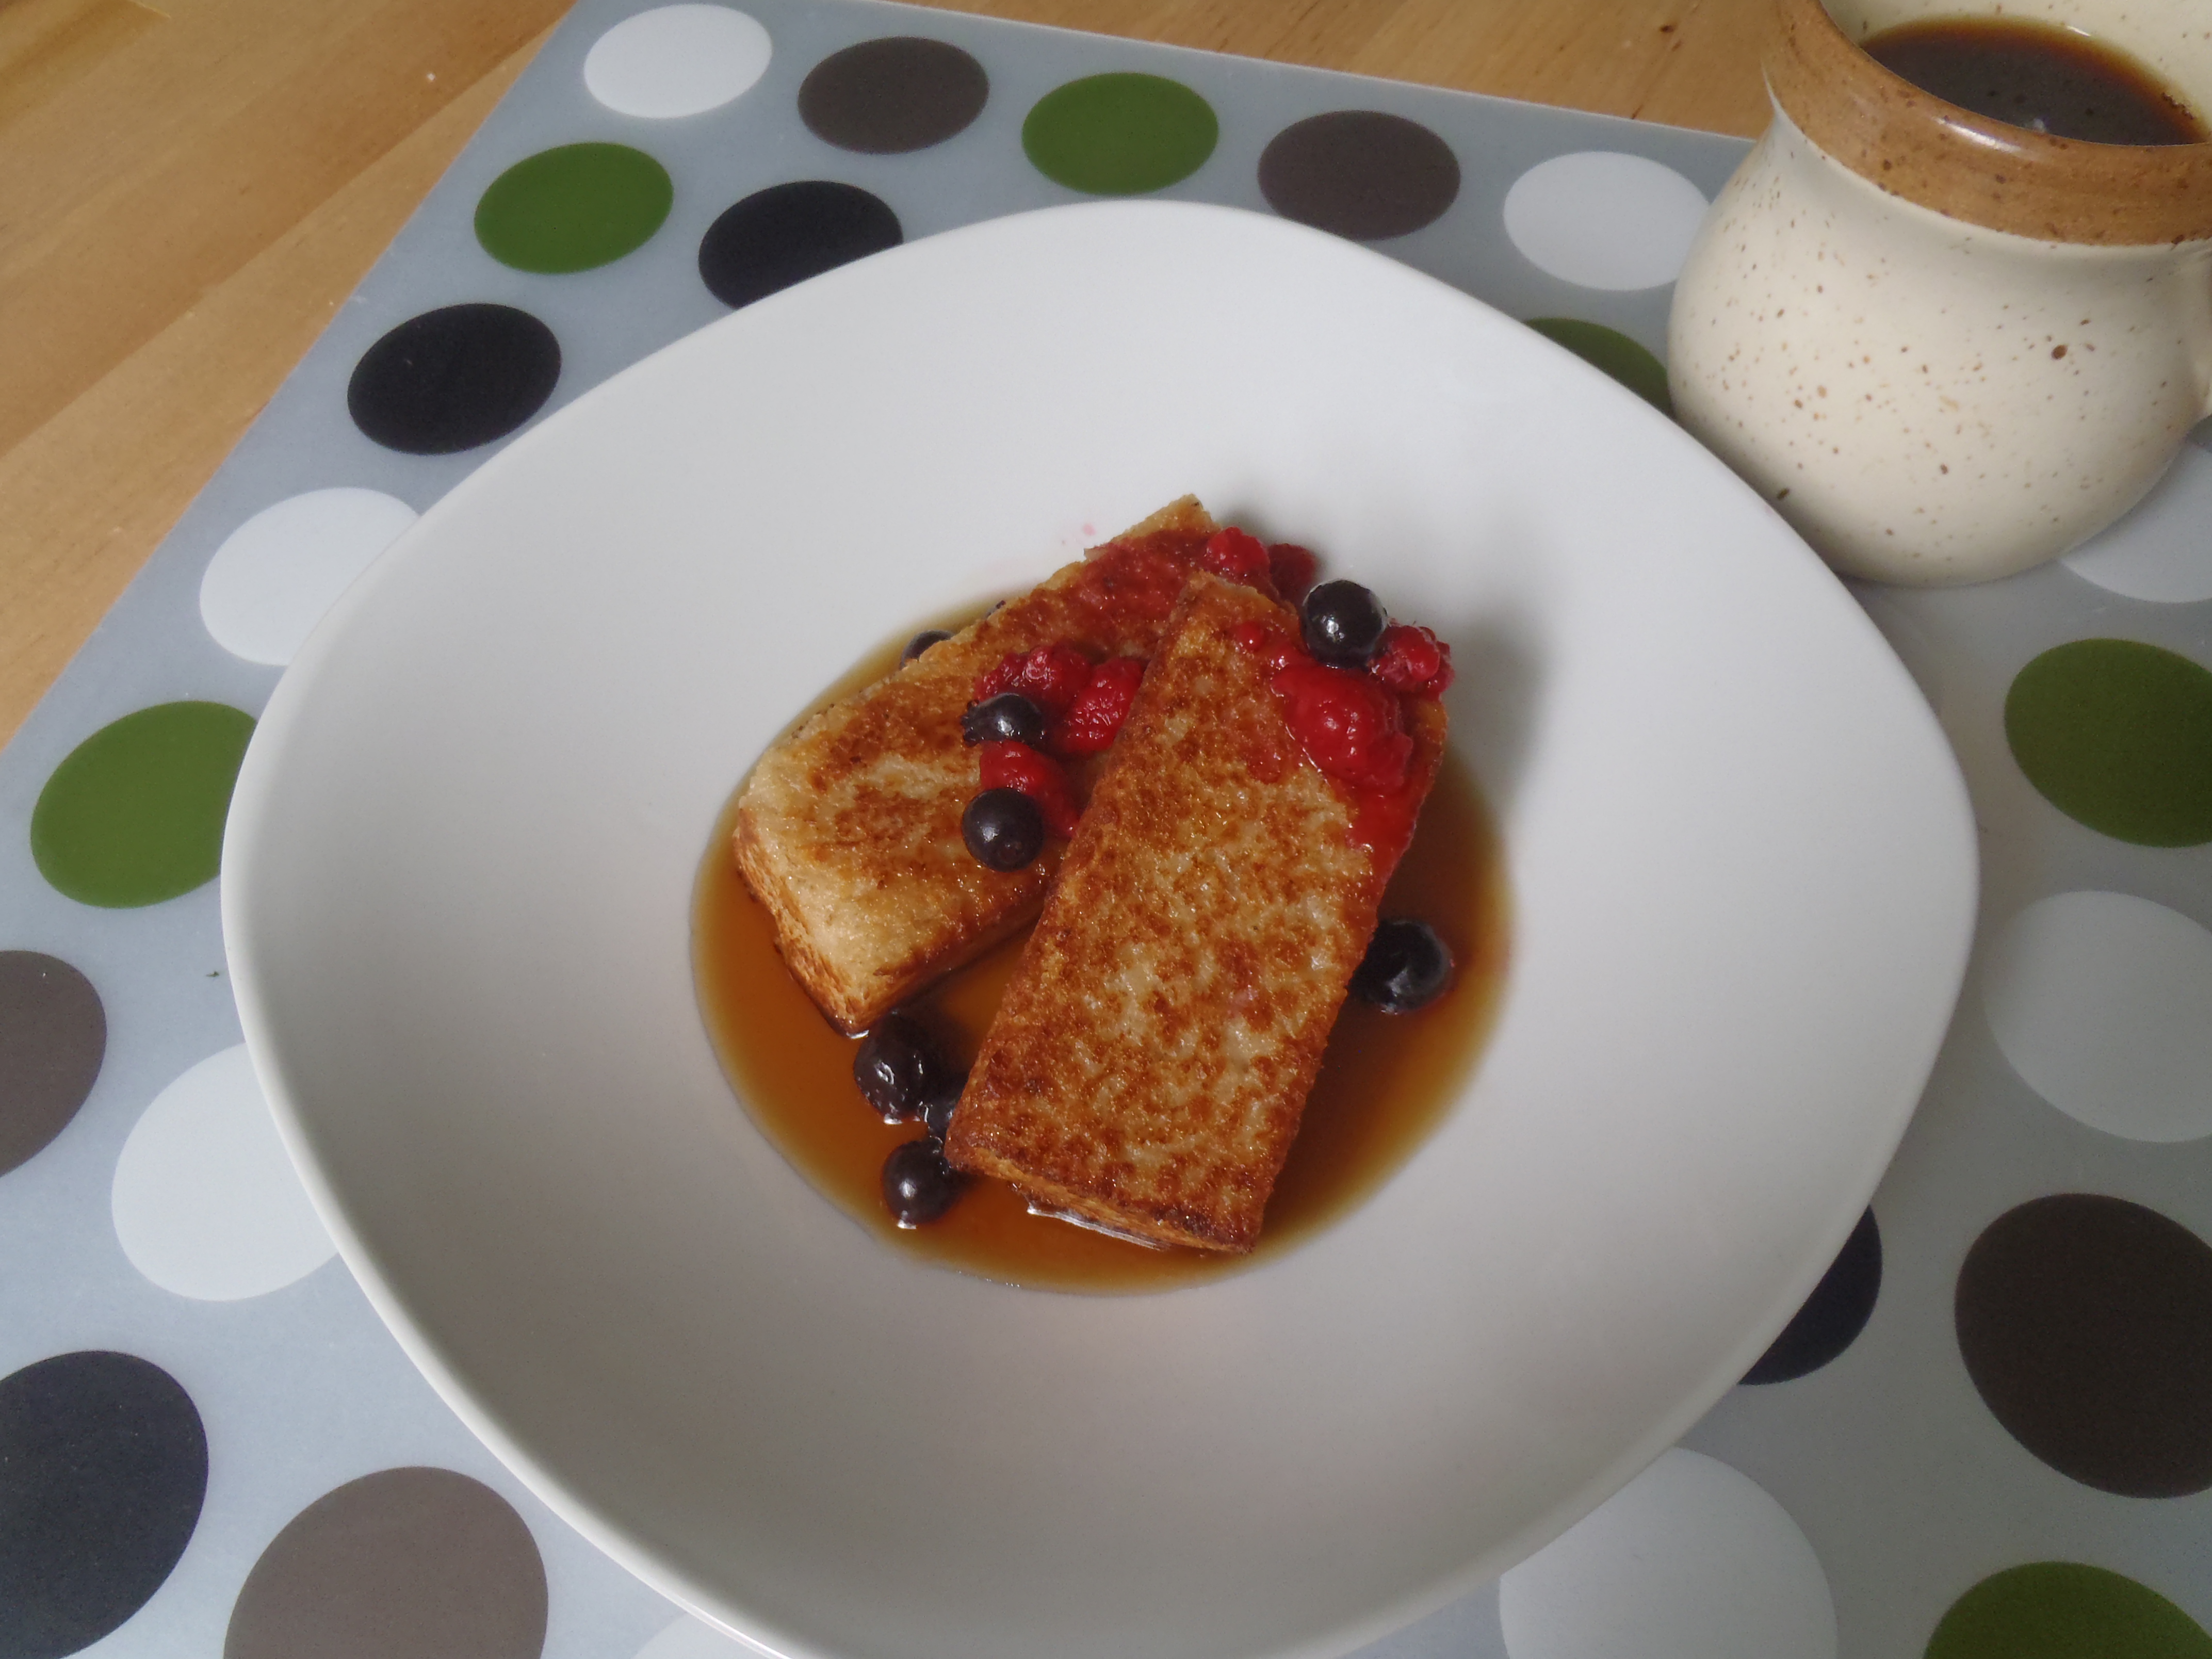 Fried porridge with berries and maple syrup